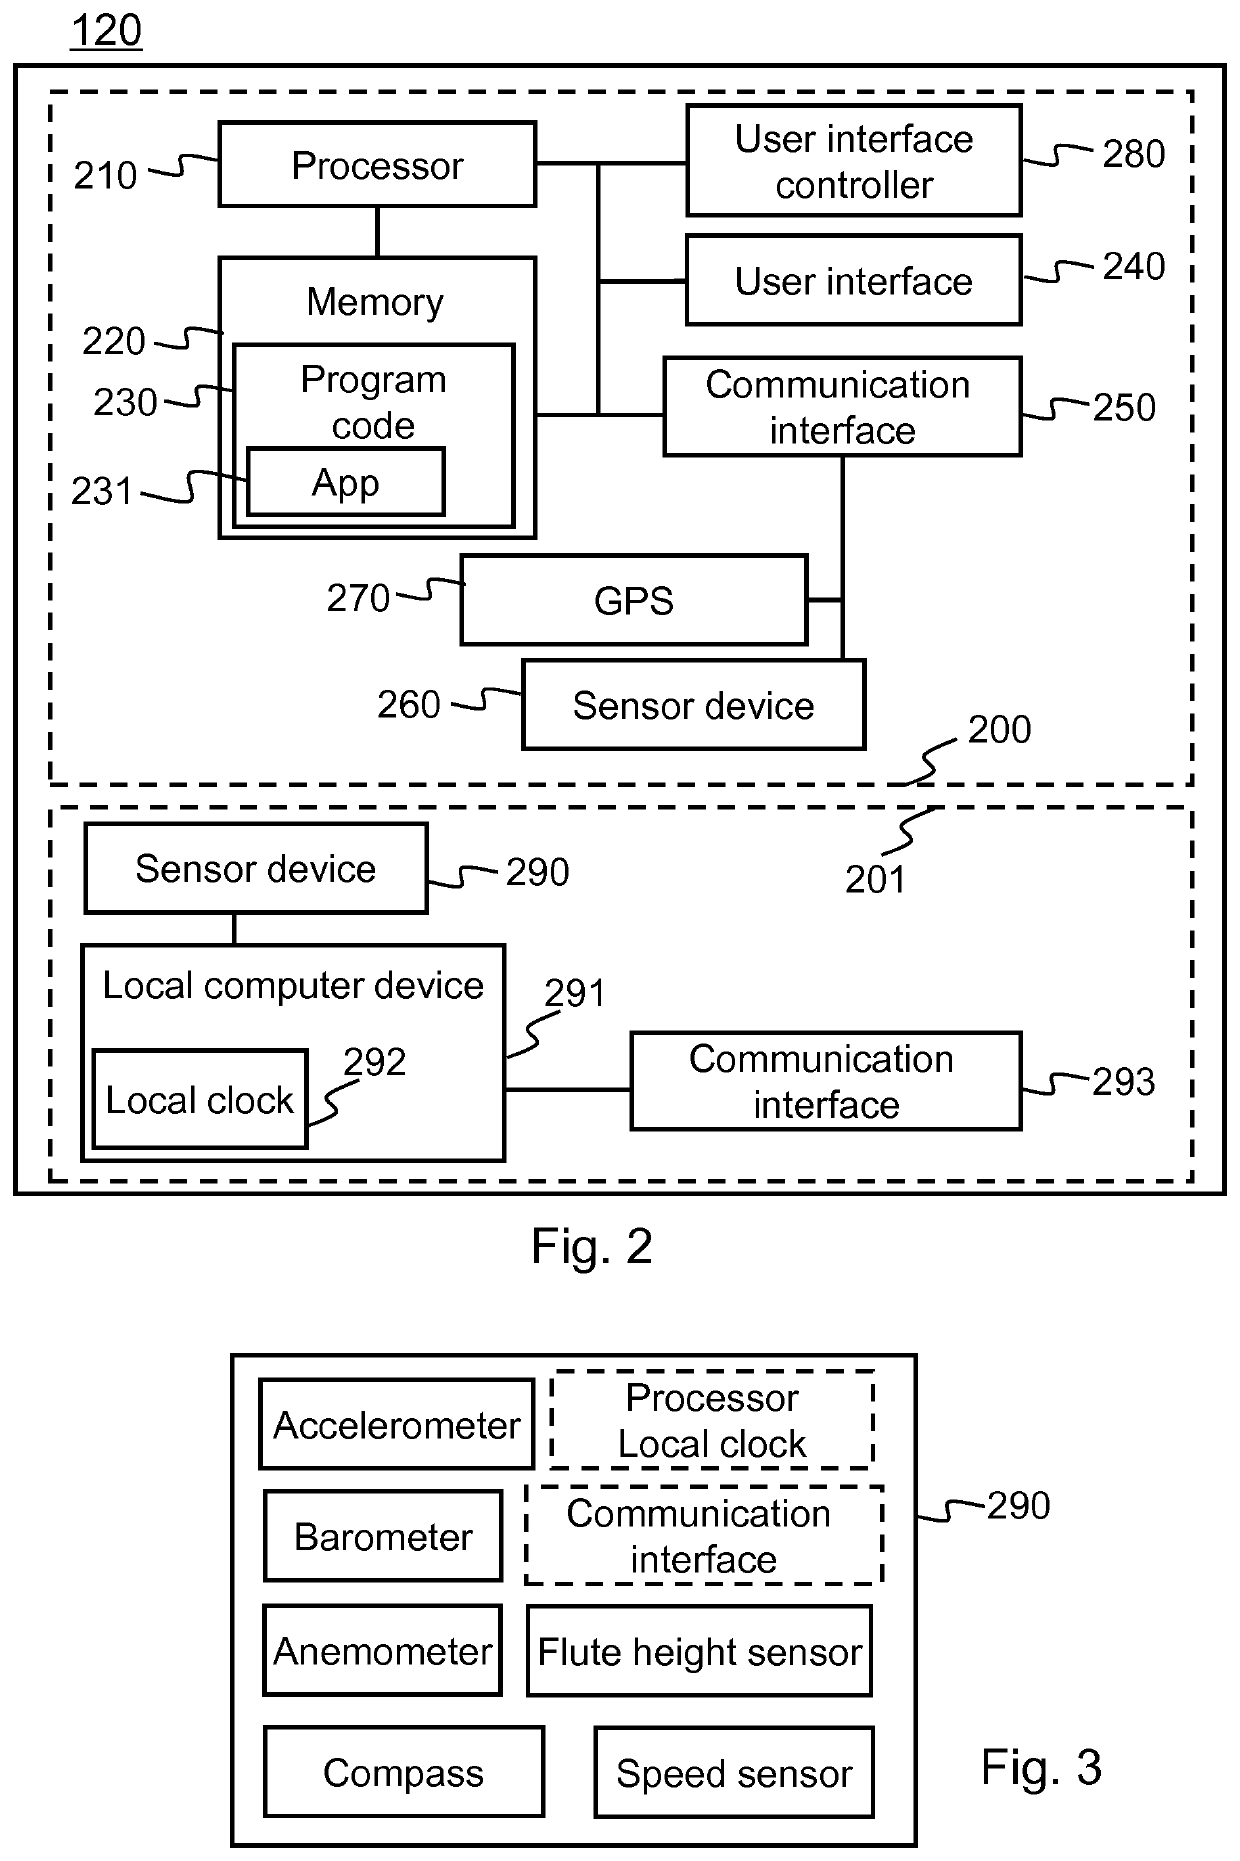 Apparatus, device and computer implemented method for providing marine vessel data of marine vessel with plurality of sensor devices